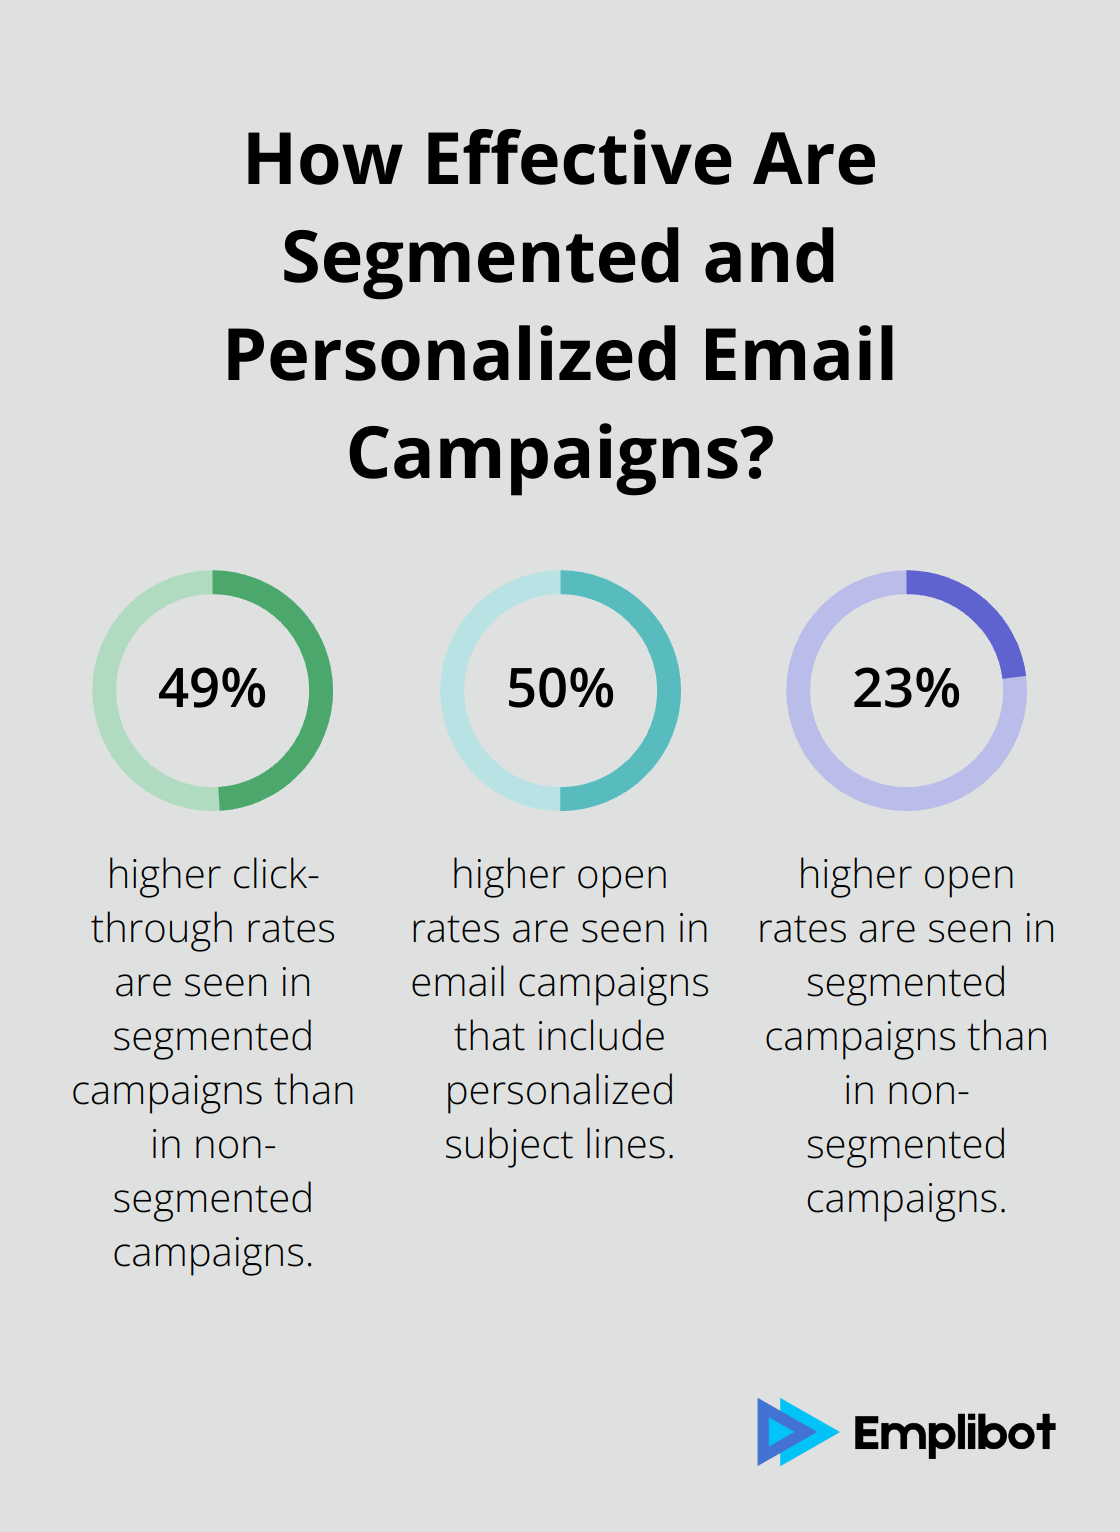 Fact - How Effective Are Segmented and Personalized Email Campaigns?